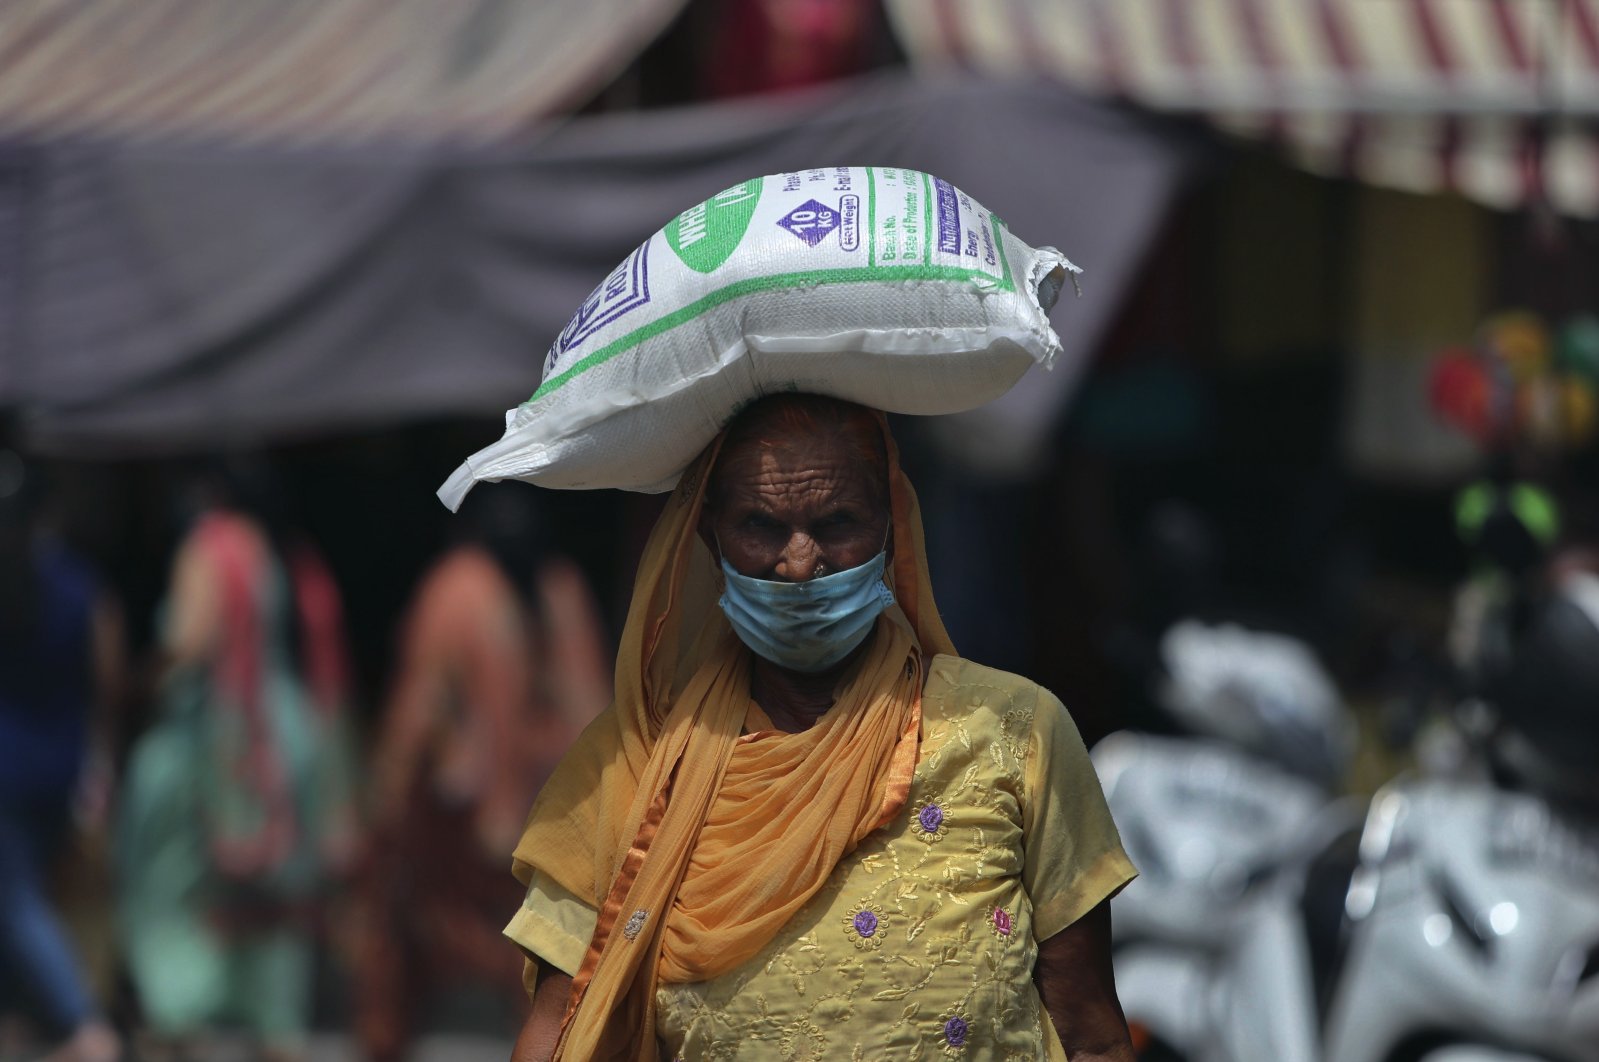 An Indian woman wearing face mask as a precaution against the coronavirus walks carrying a bag of flour on her head  in Jammu, India, Thursday, Aug 6, 2020. (AP Photo)